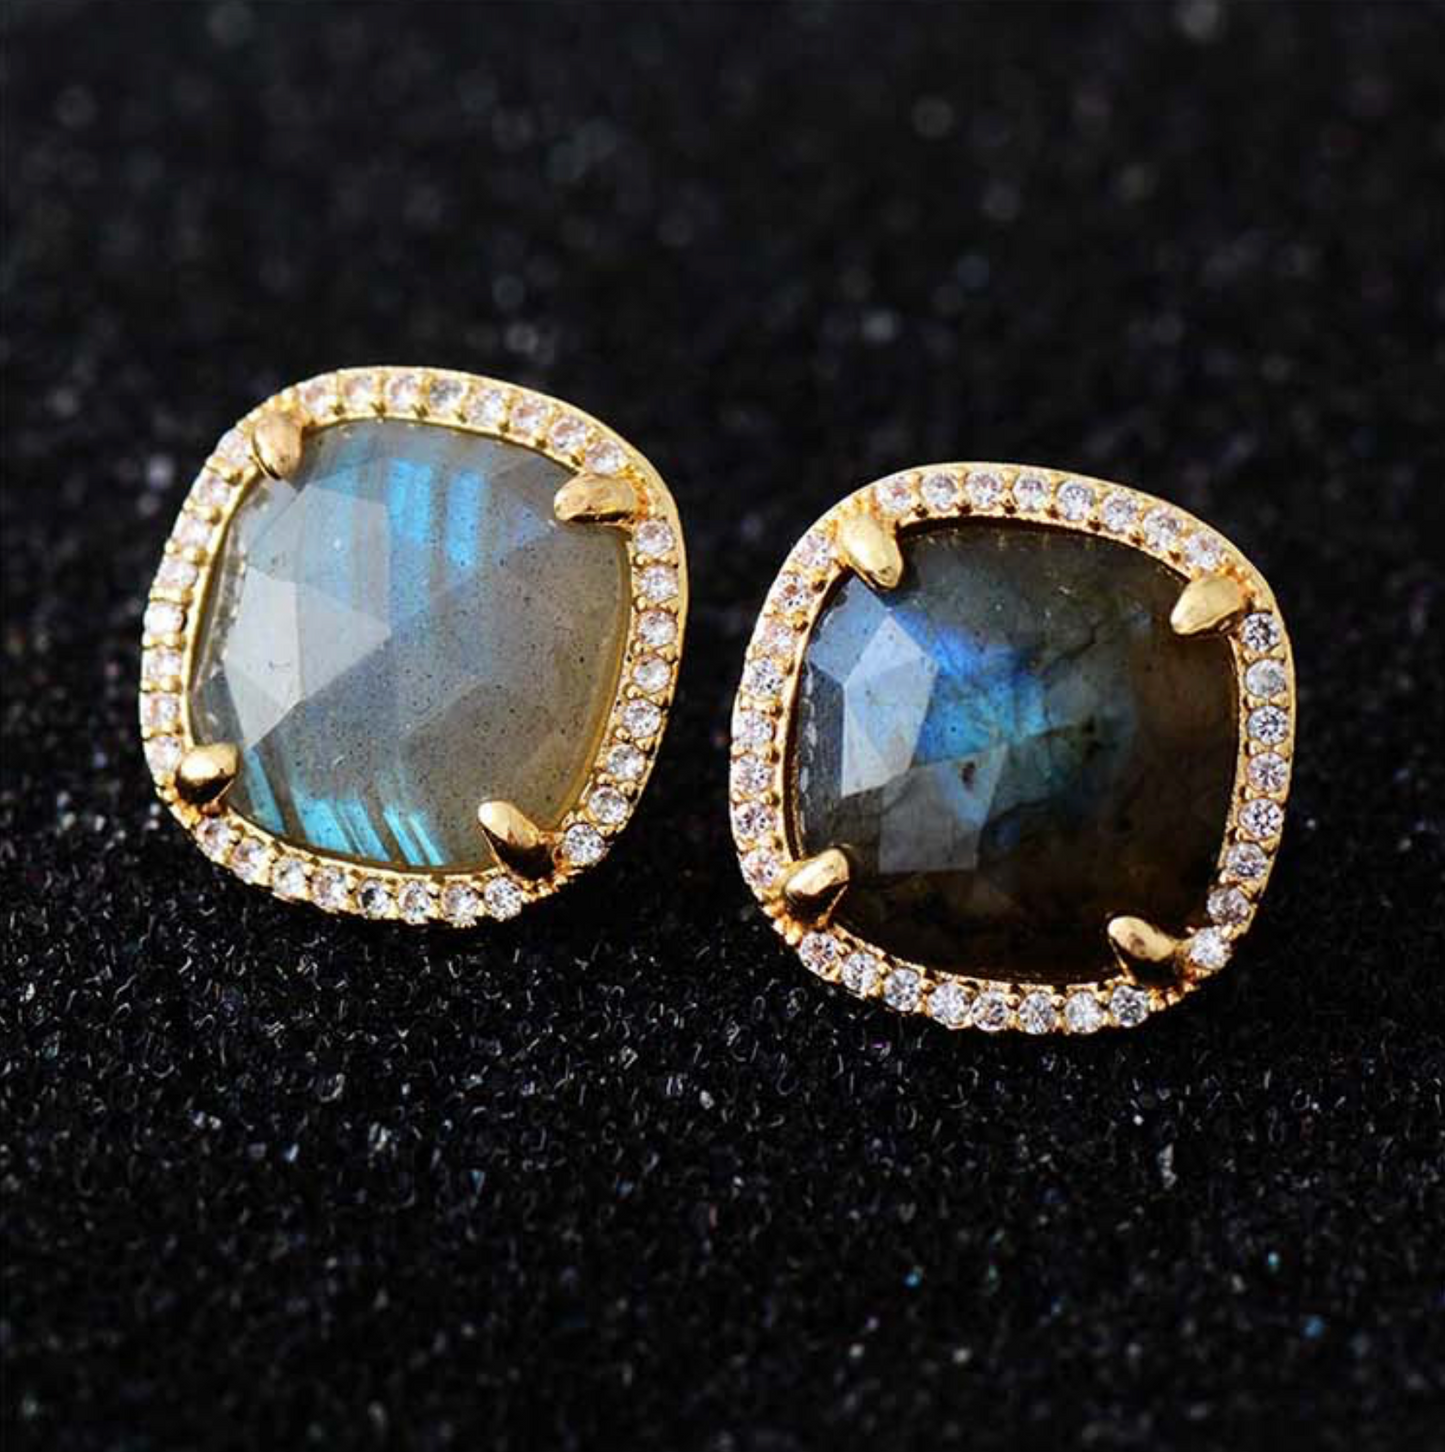 Pave Set Faceted Labradorite Cushion Stud Earring